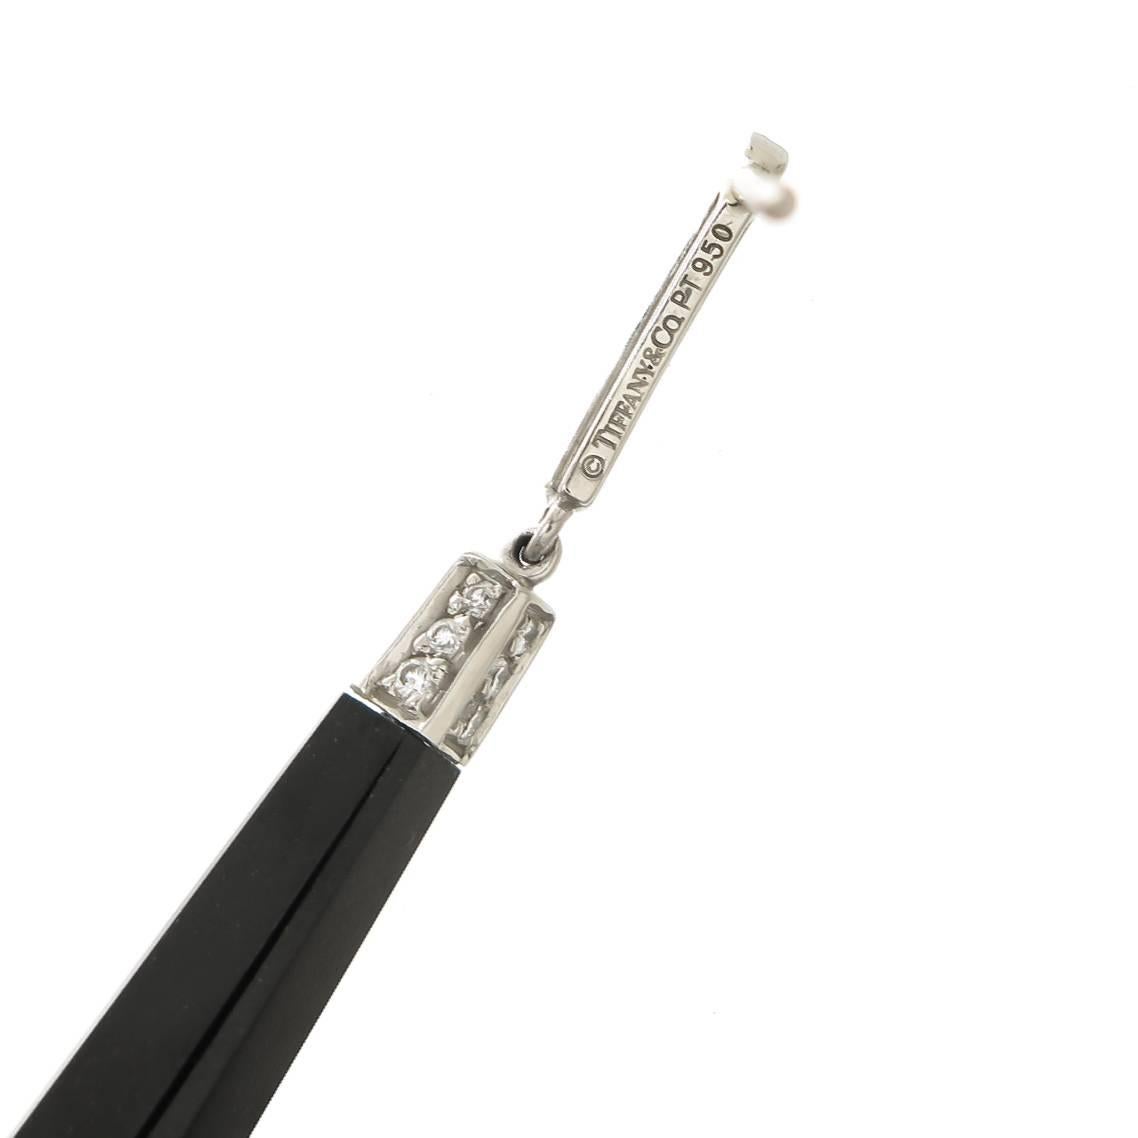 Circa 2000 Tiffany & Co. Platinum and Onyx Long Dangle Earrings, measuring 2 1/2 inch in length and 1/4 inch in diameter.The Onyx has Faceted Corners and ends. The top section is set with Round Brilliant cut Diamonds totaling 1/2 Carat. Pressure fit